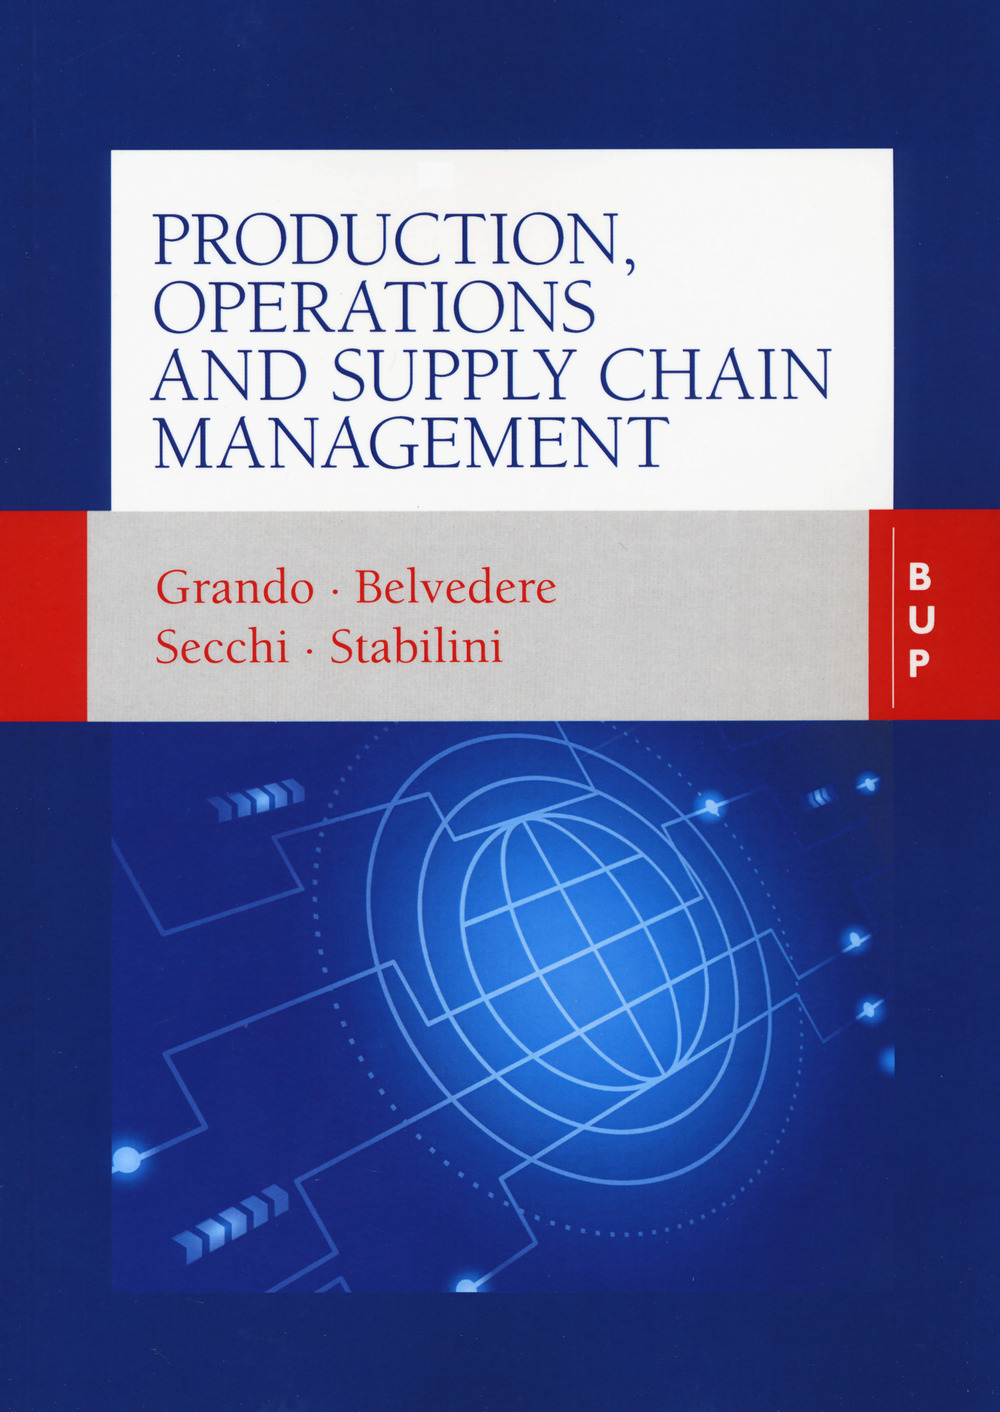 Production, operations and supply chain management